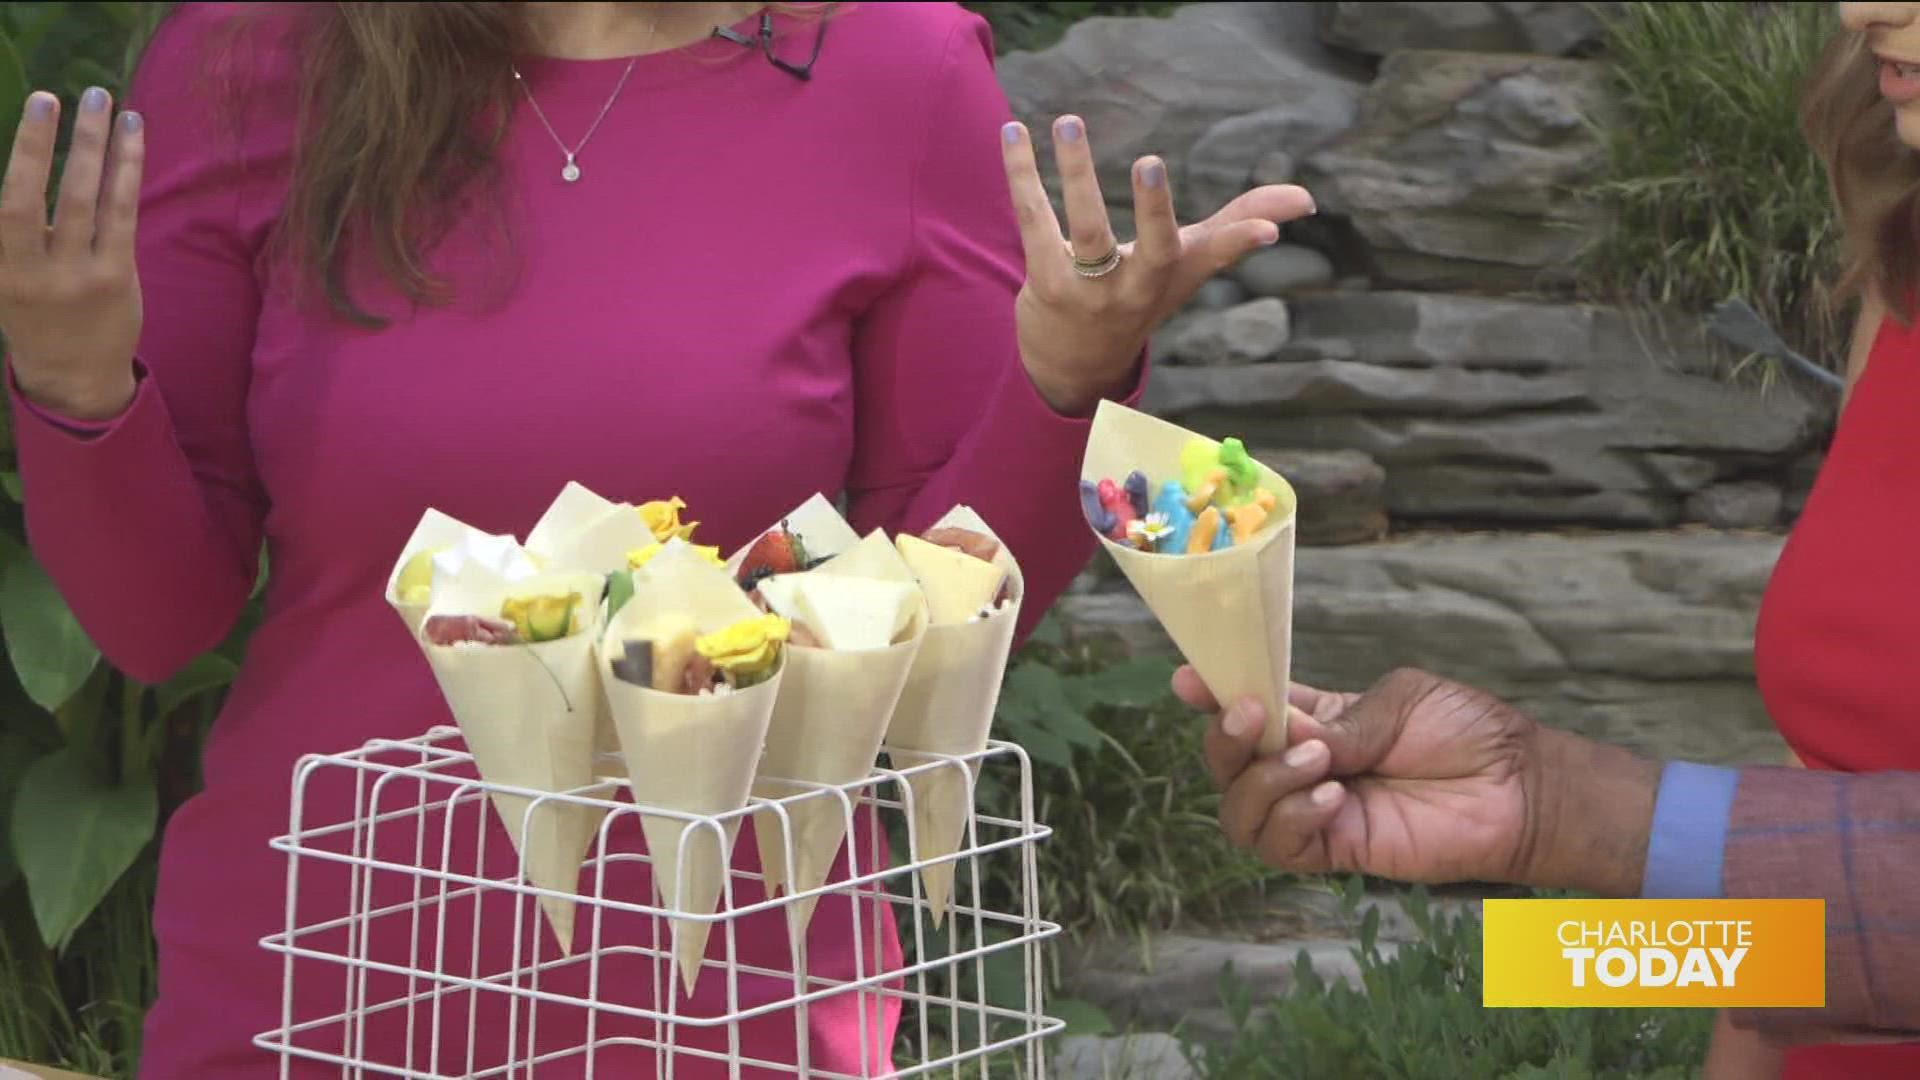 Cones filled with cheeses, meats, candy, fruits and veggies are delicious and easy to make